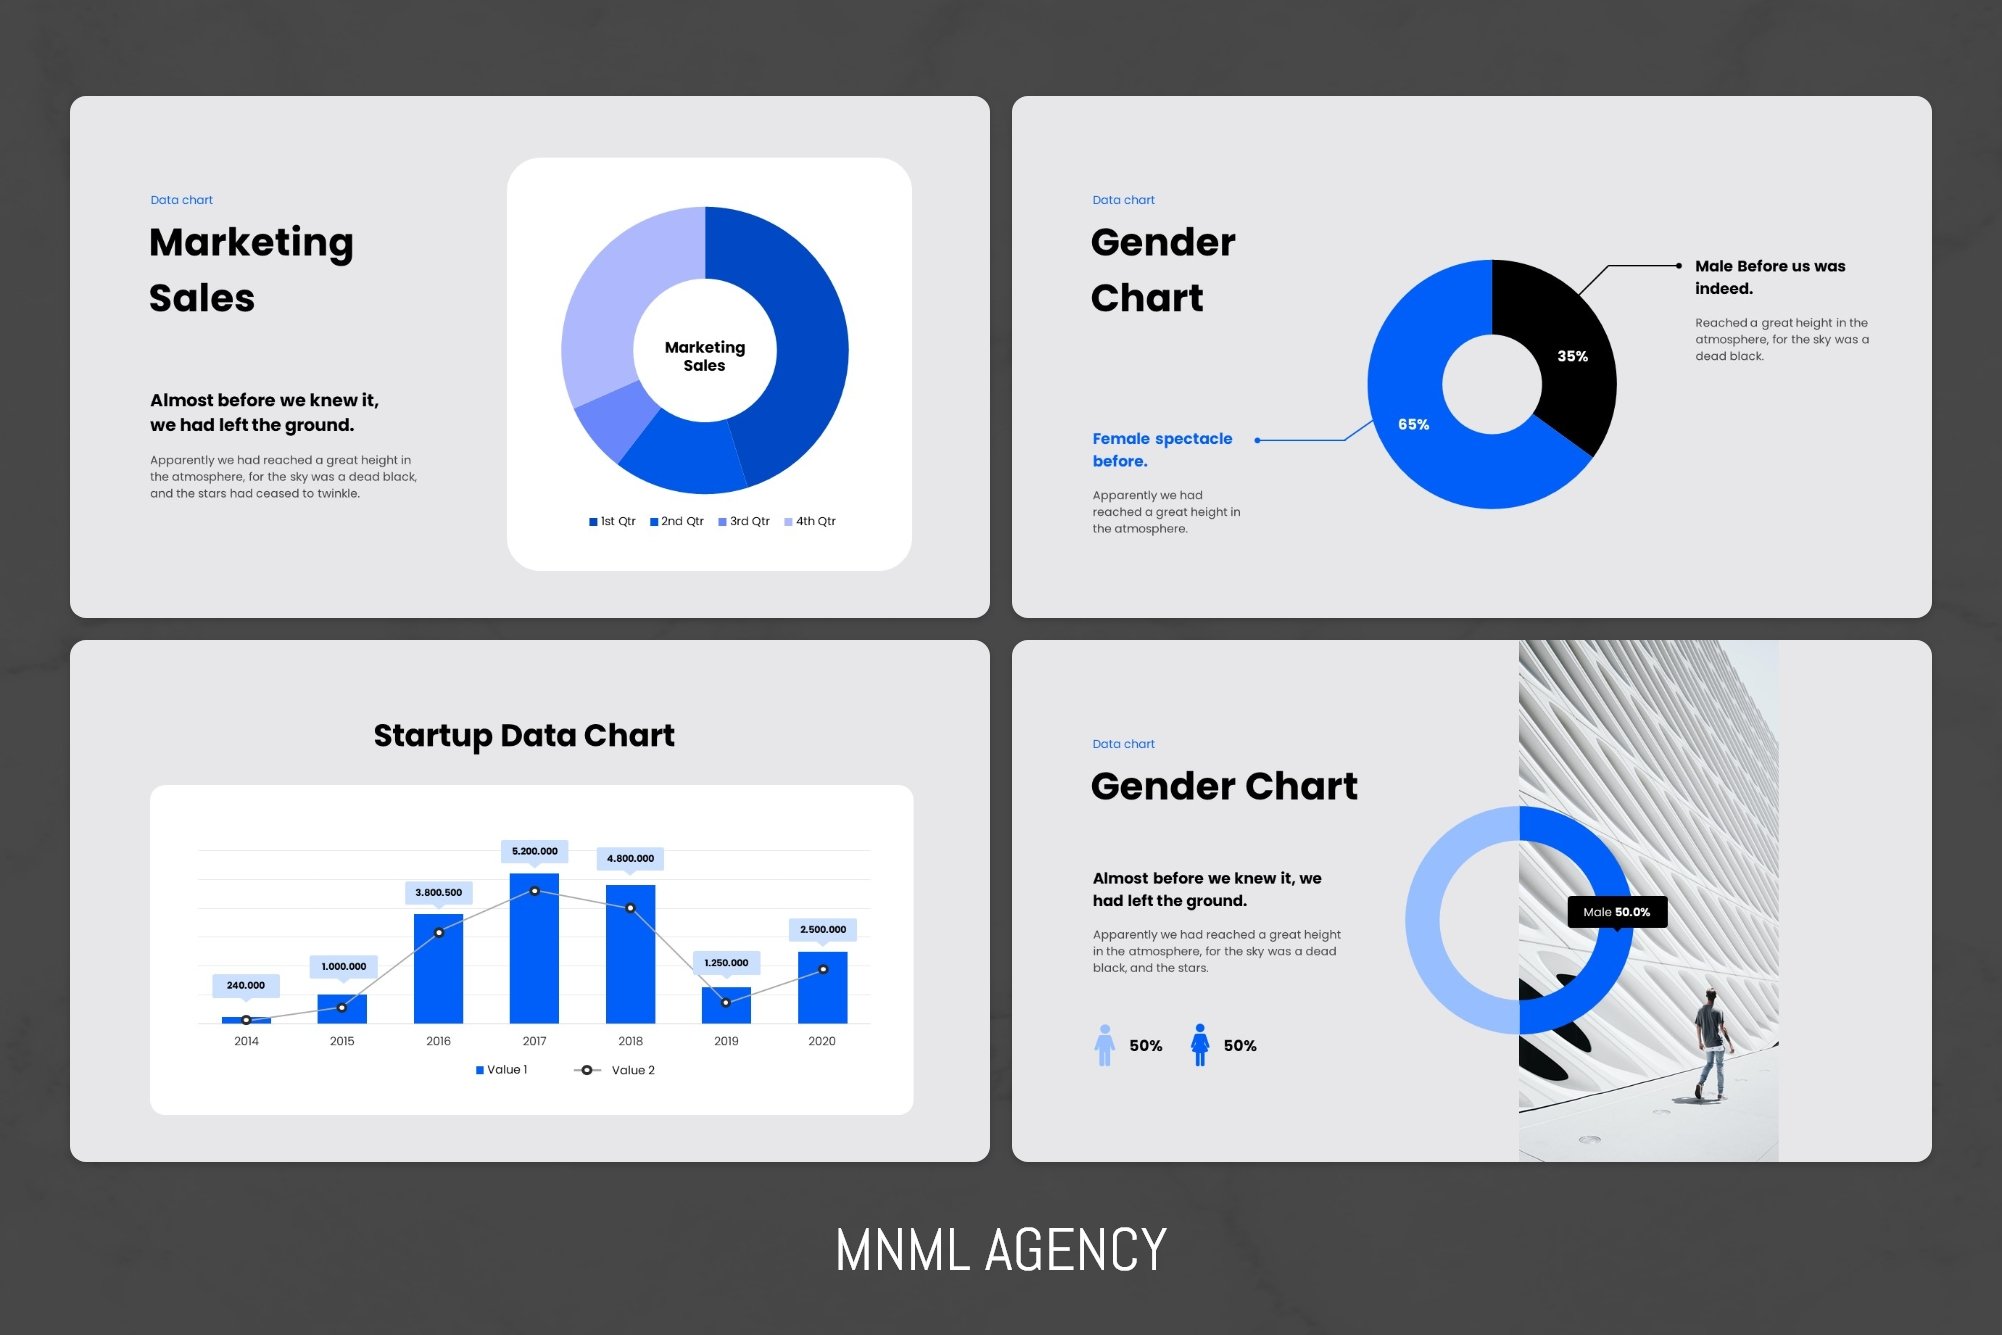 You can choose any type of chart and customize its color palette for yourself.